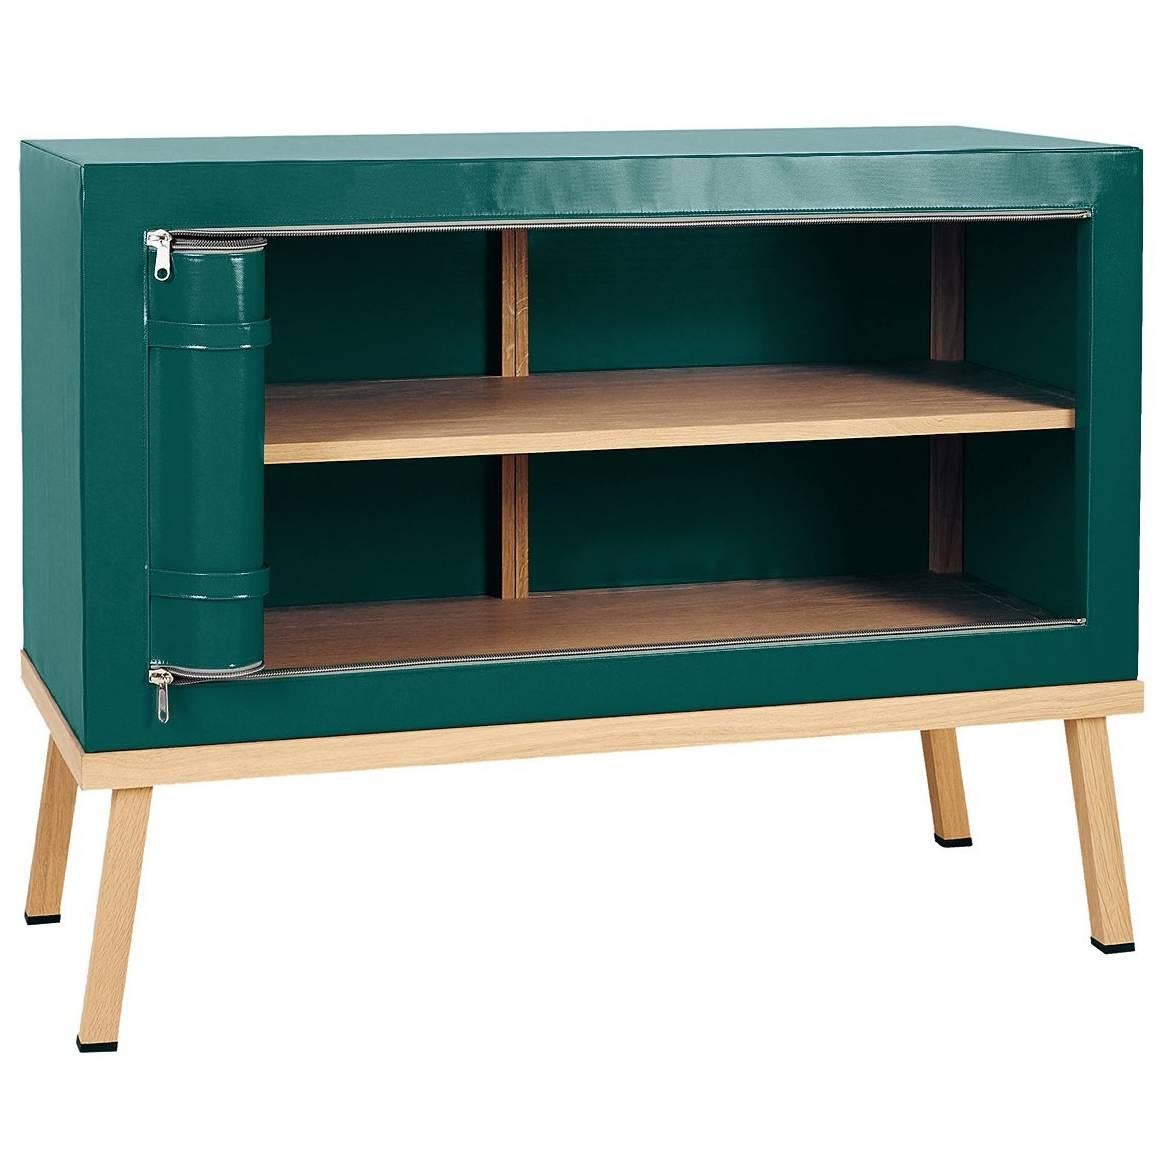 Visser and Meijwaard Truecolors Dresser or Credenza in Green PVC Cloth For Sale